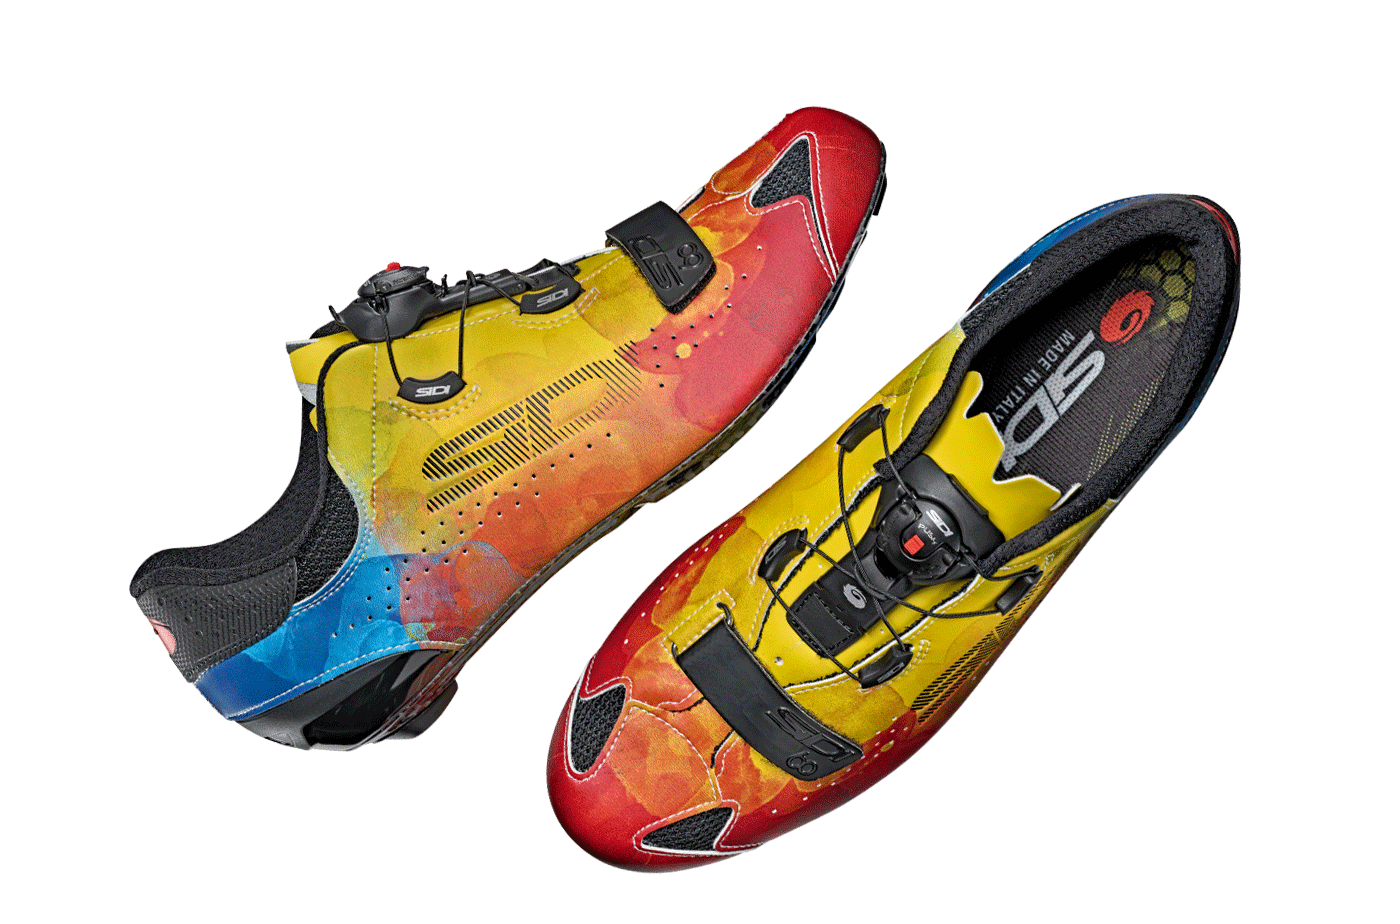 Sidi's Limited Edition Sixty Multicolor Shoes are Very Pretty